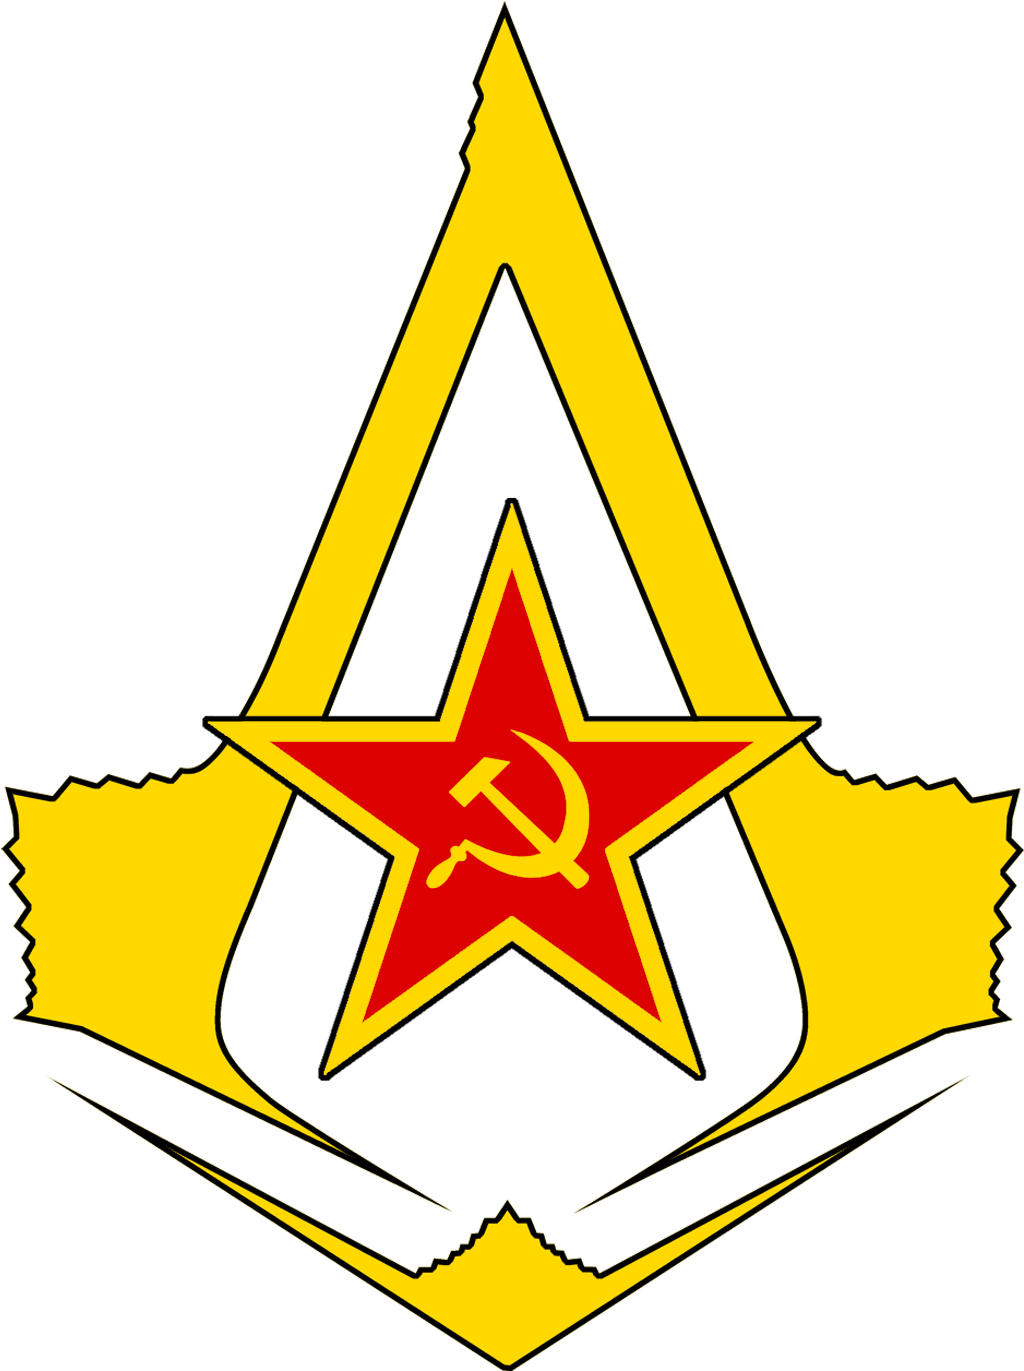 Emblem Of The Soviet Assassins By Redrich1917 - South African Communist Party (1500x1500)